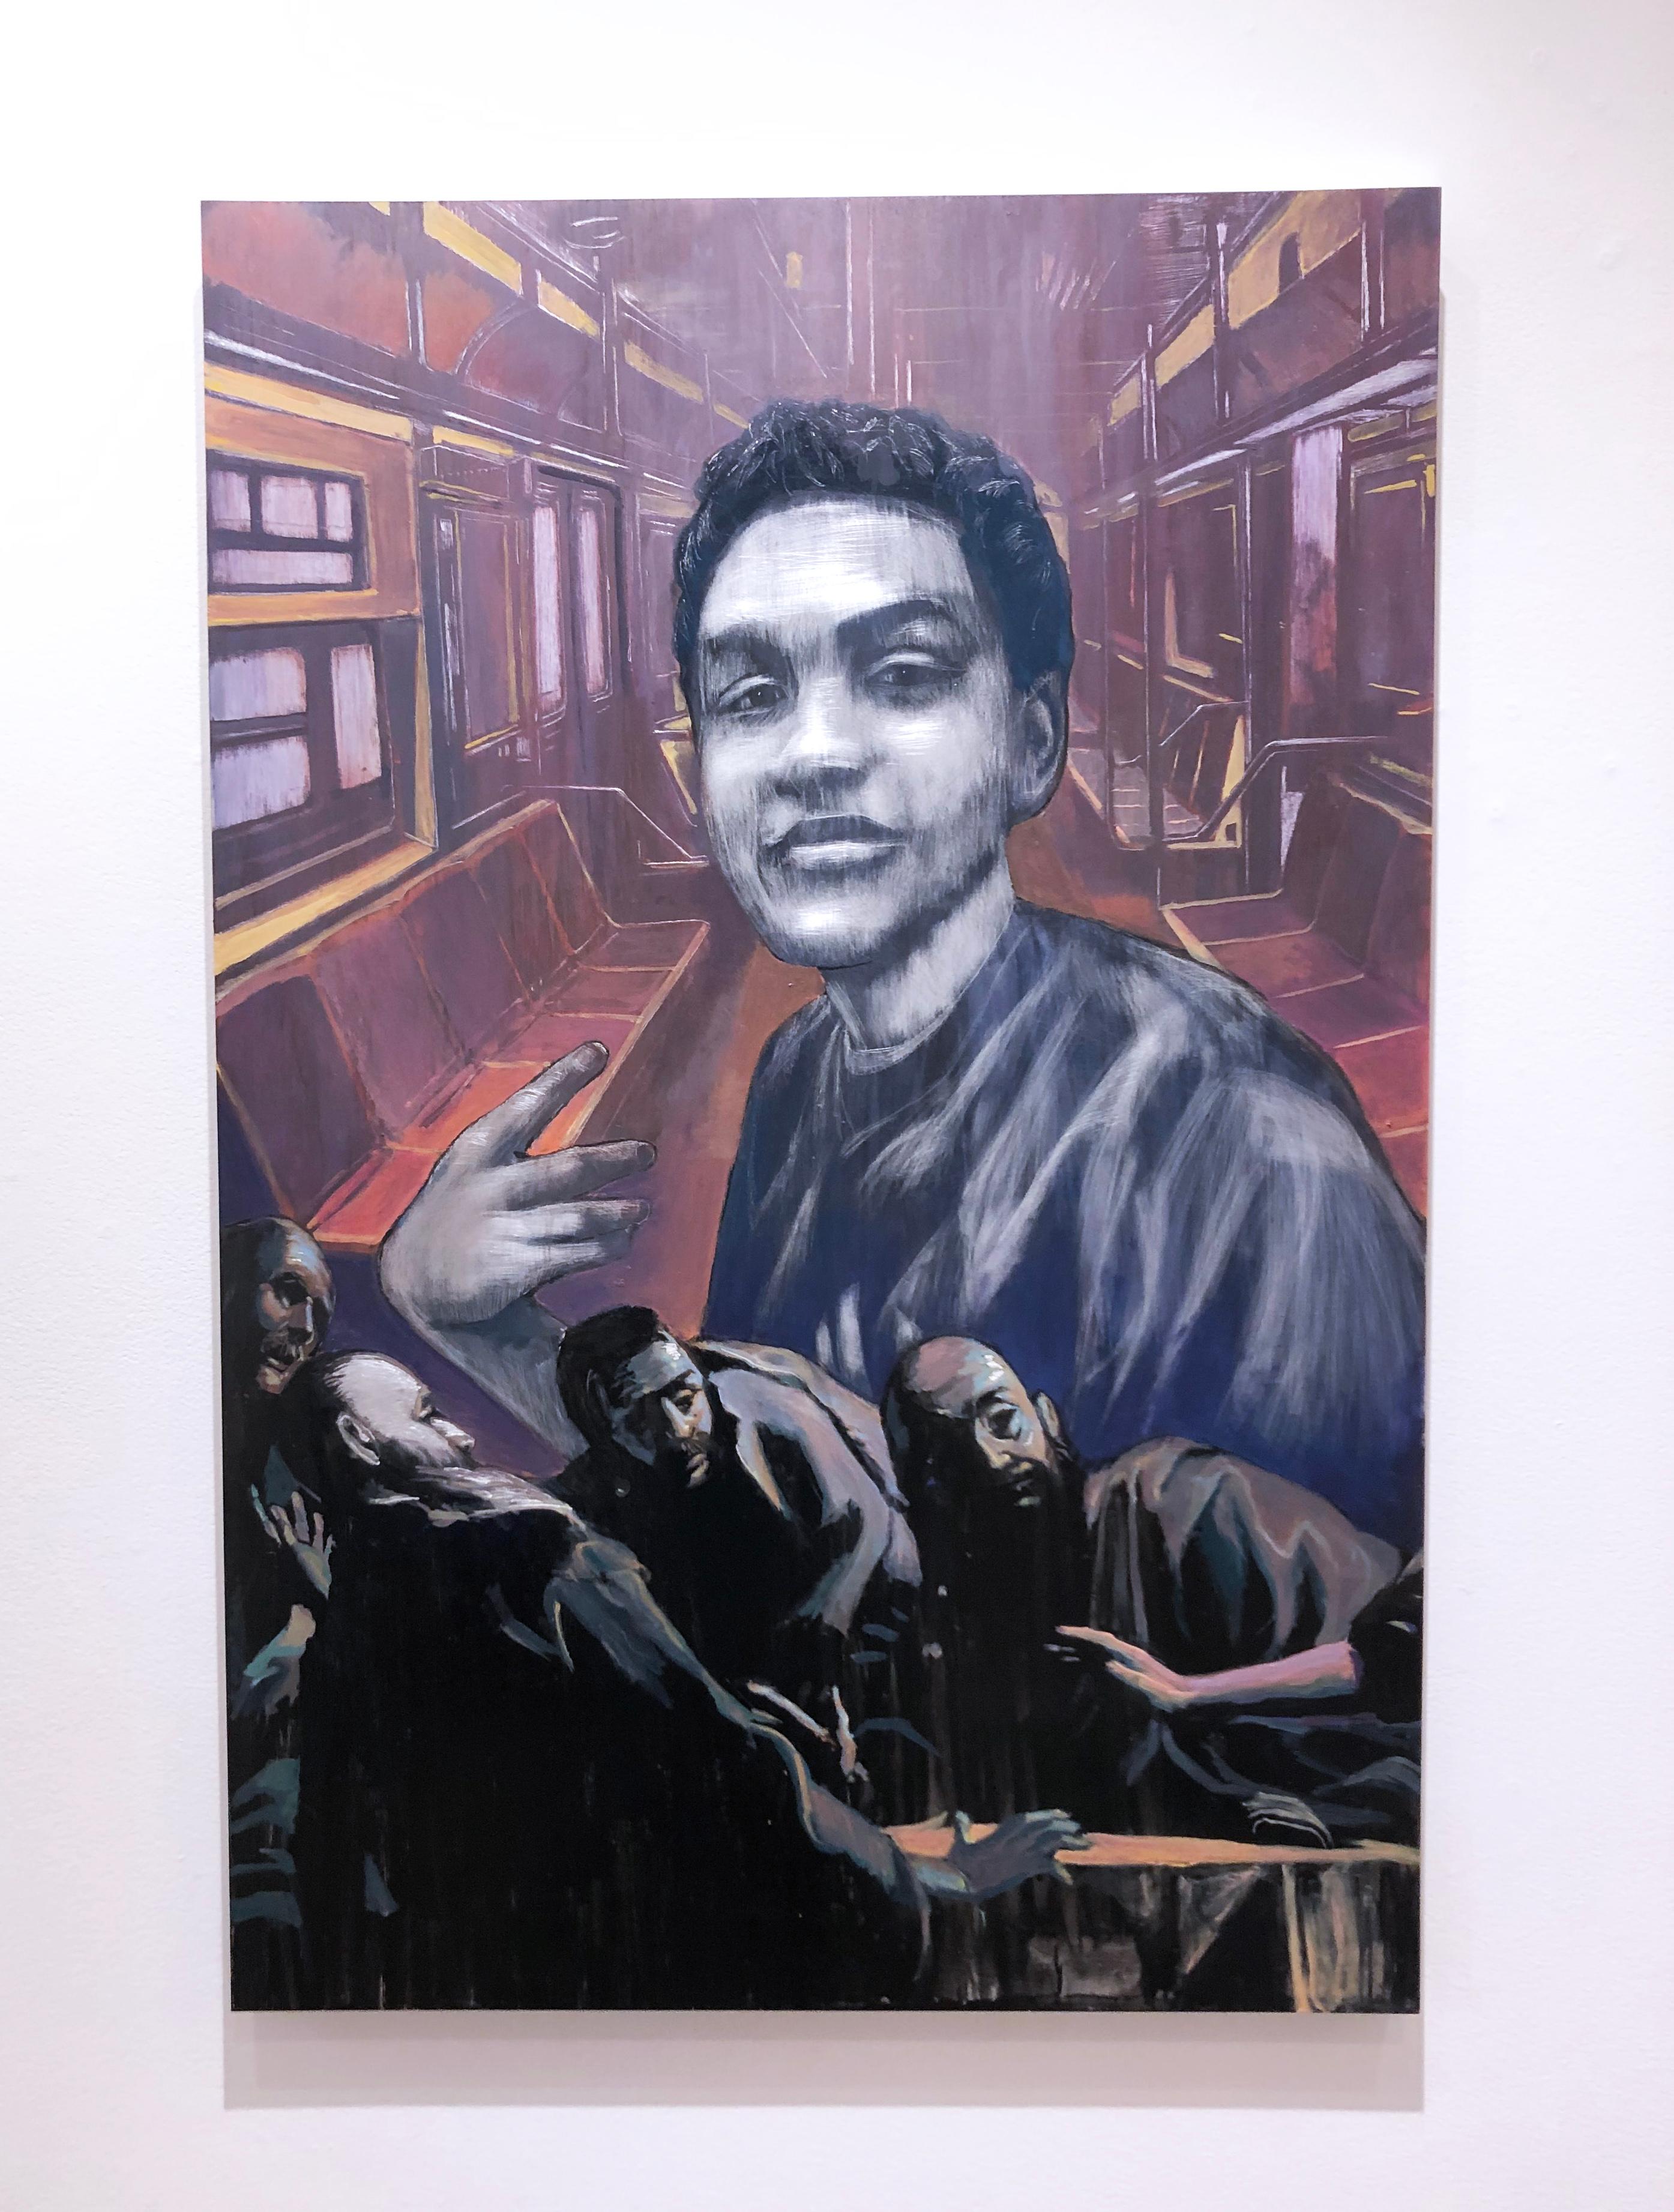 The Last Train, 2020 - Painting by Distort